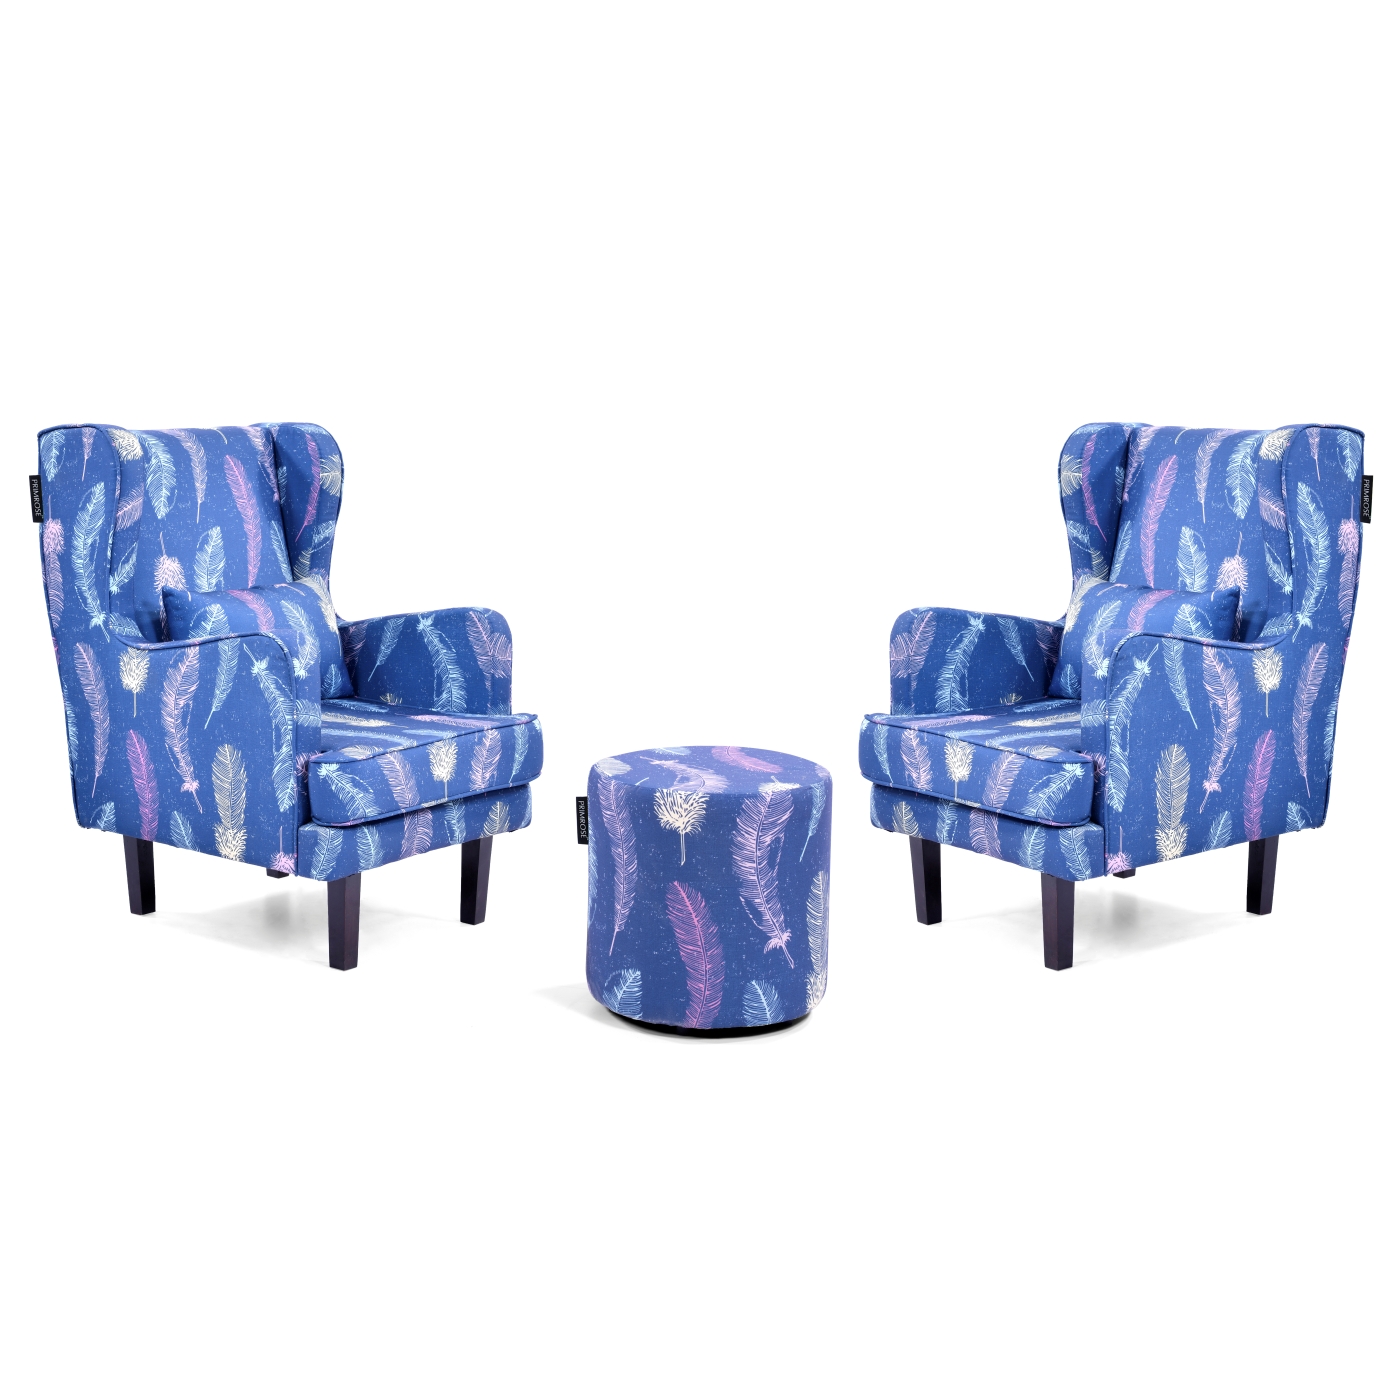 PRIMROSE Dream Feature Digital Printed Faux Linen Fabric High Back Wing Chair Combo (2 Chair+1 Ottoman) - Blue  